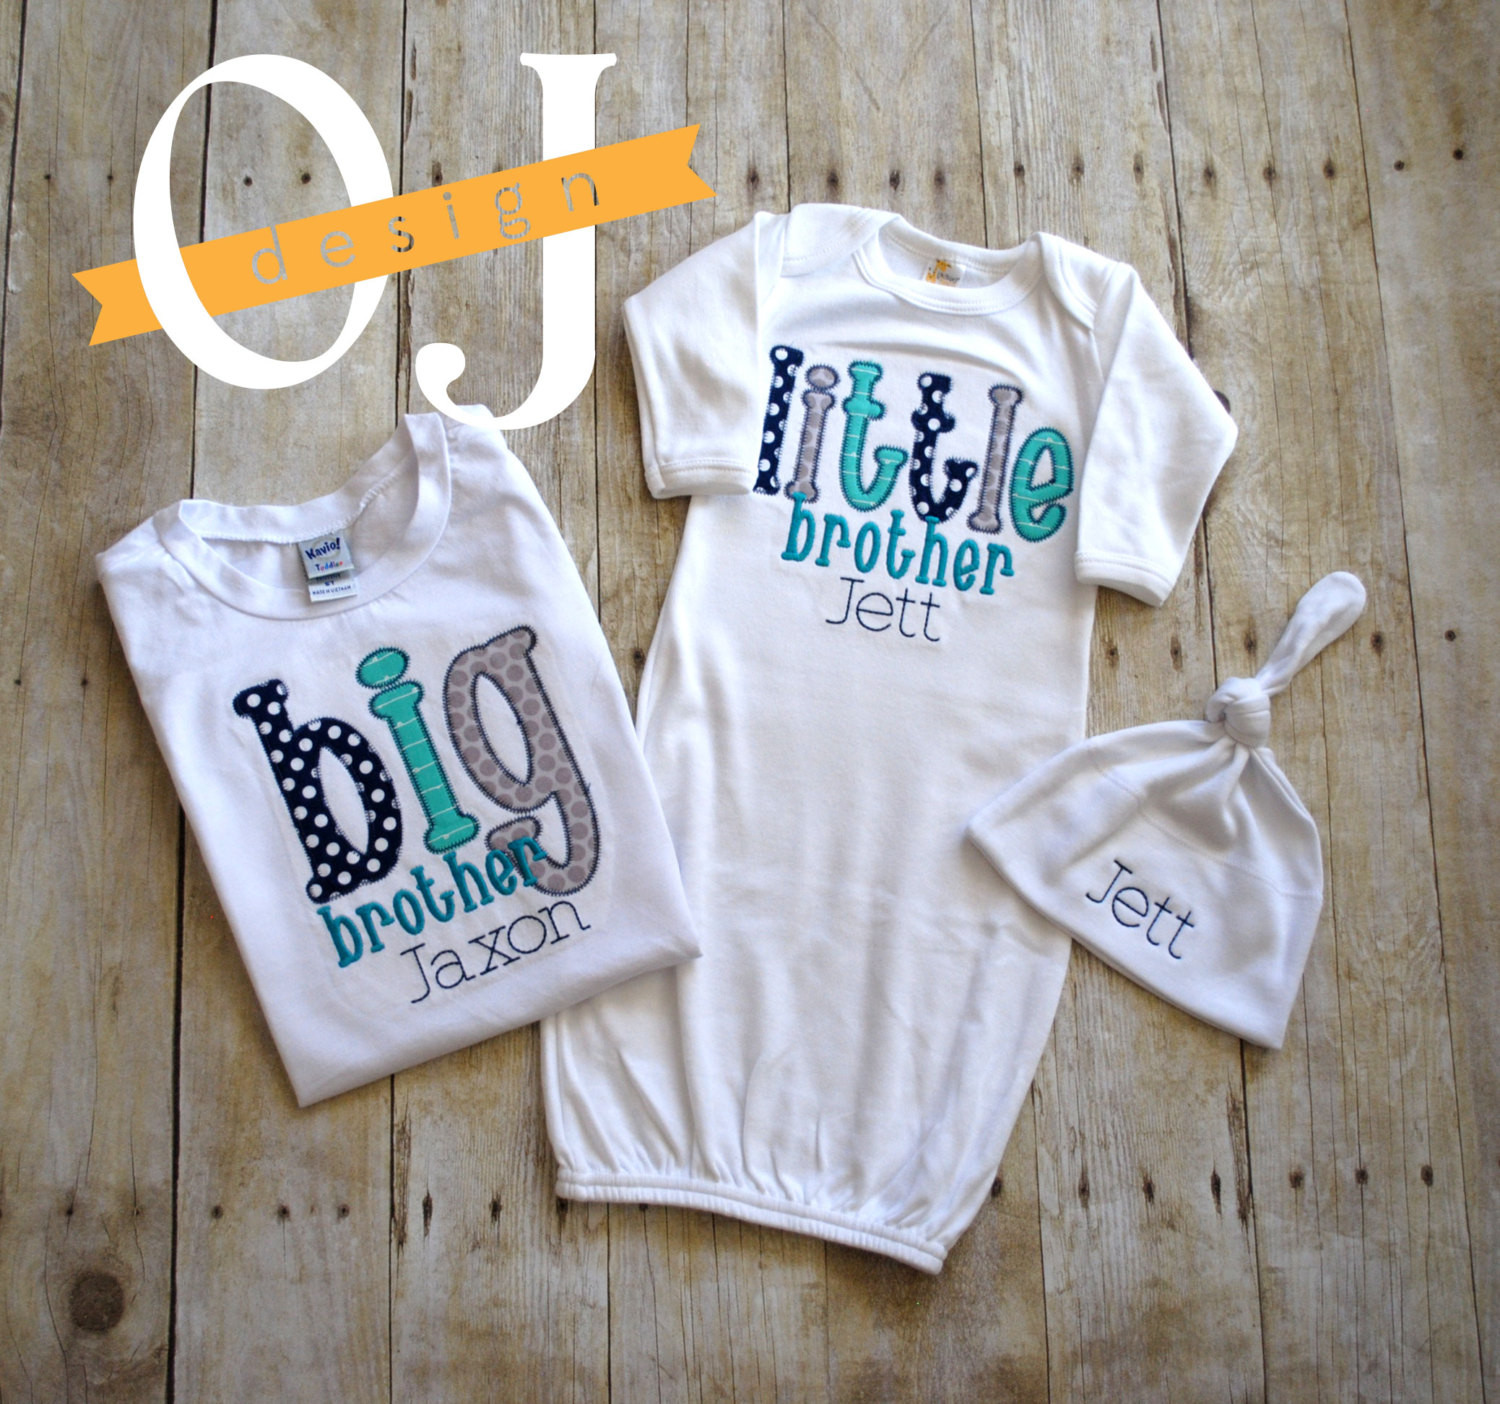 Personalized Gifts For Baby Boy
 Big Brother Little Brother Personalized Baby Boy Newborn Gift